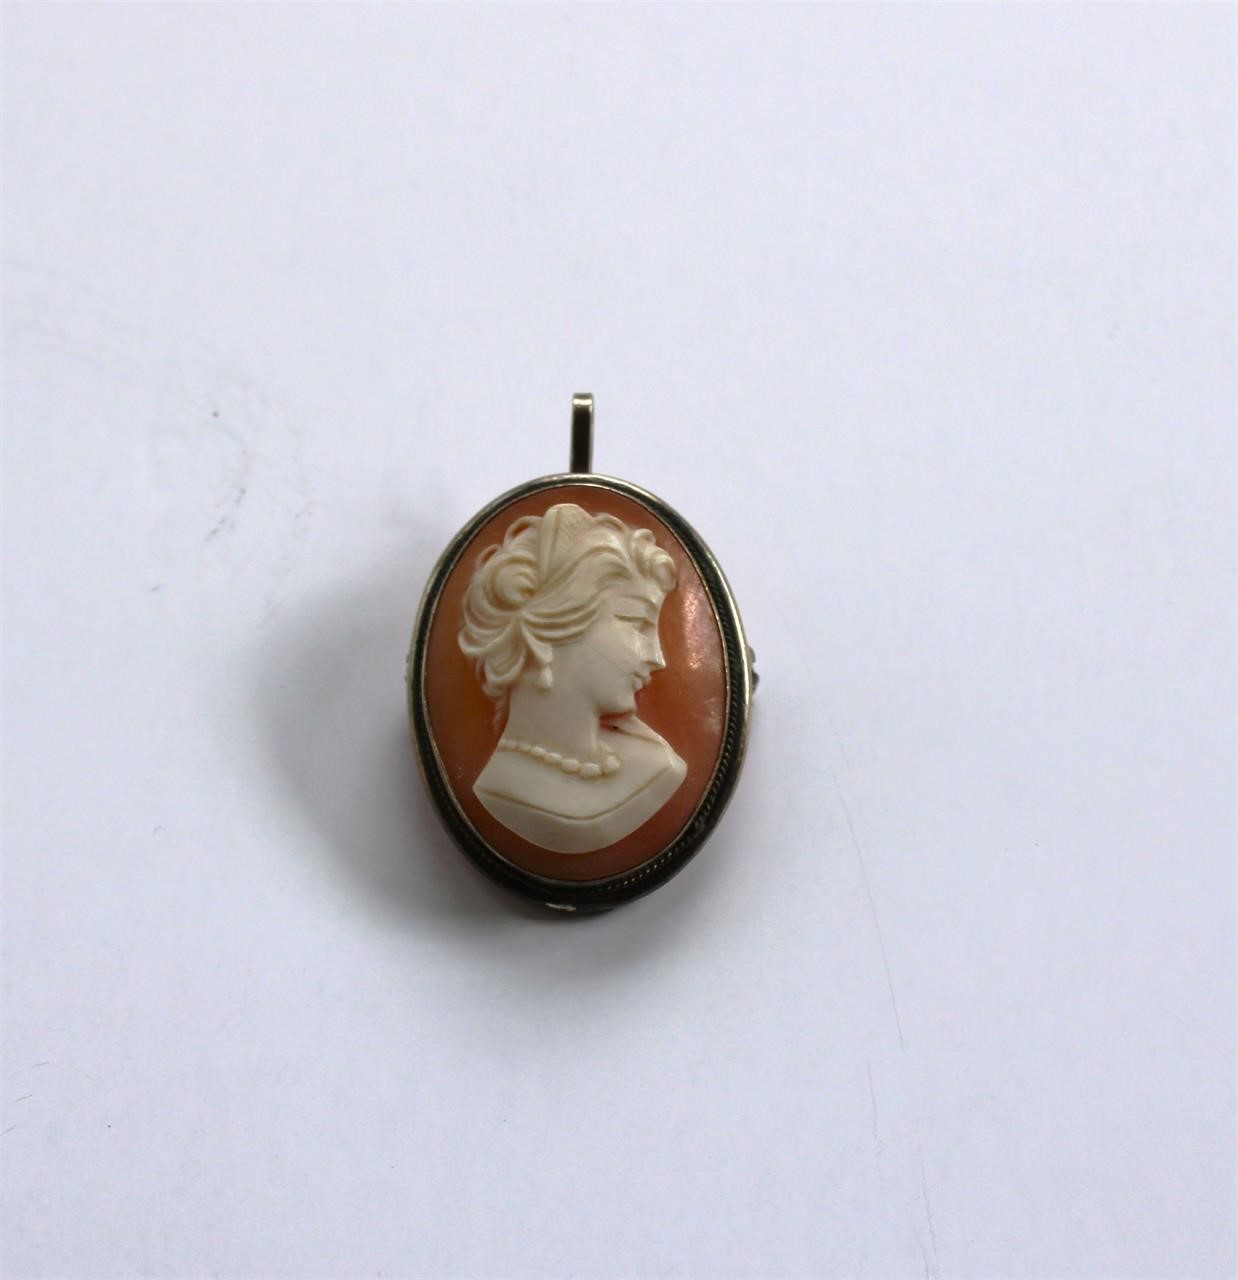 Vintage Cameo Pendant / Broach Marked 800 Silver